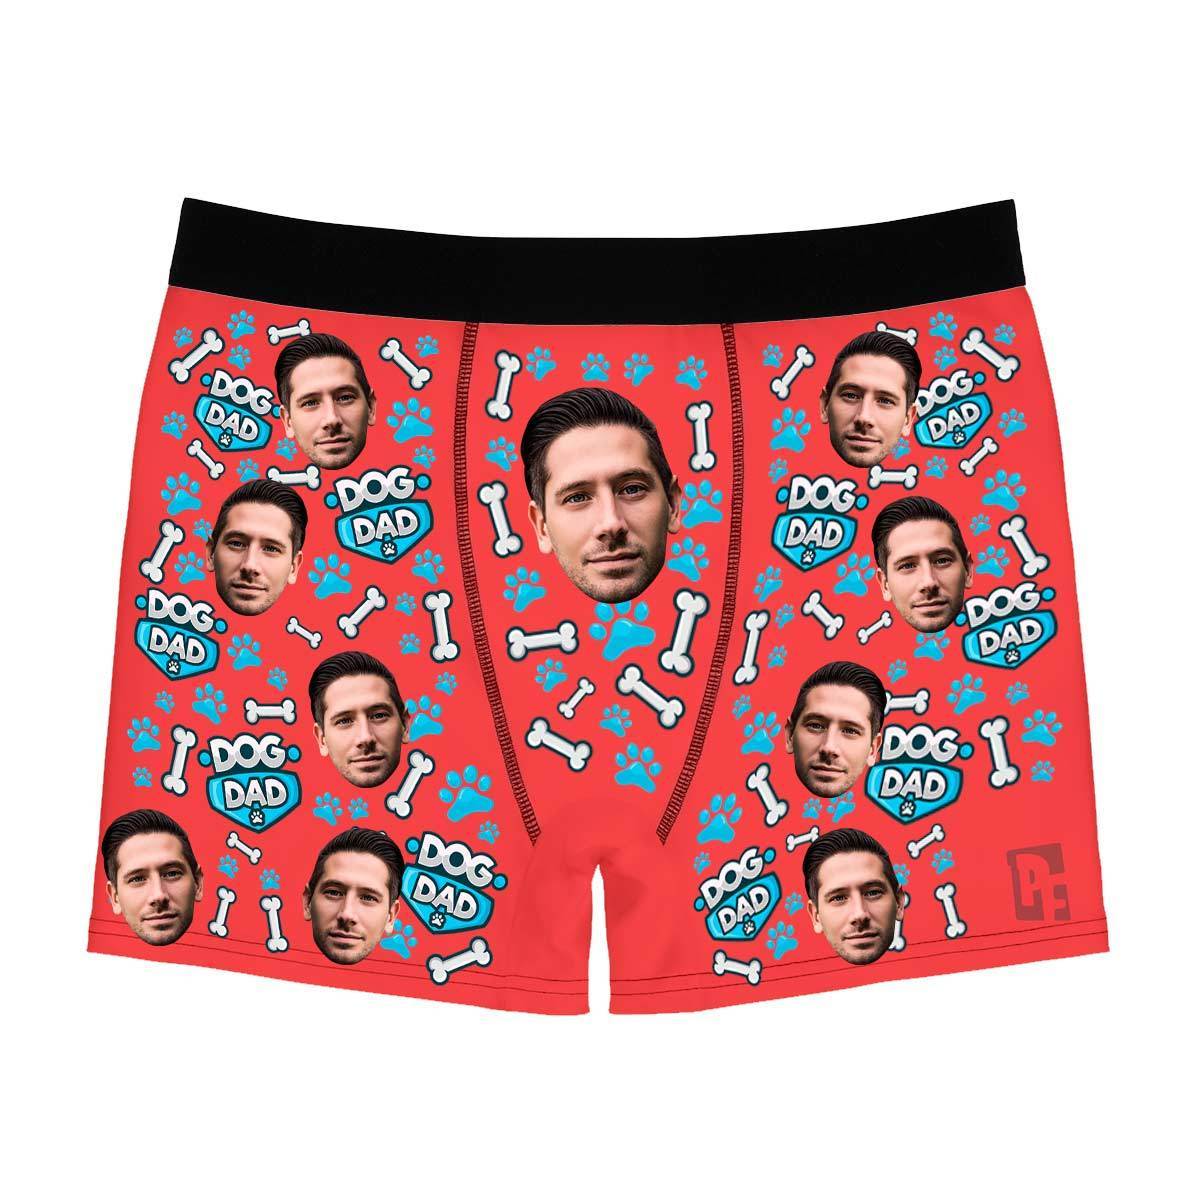 Red Dog dad men's boxer briefs personalized with photo printed on them